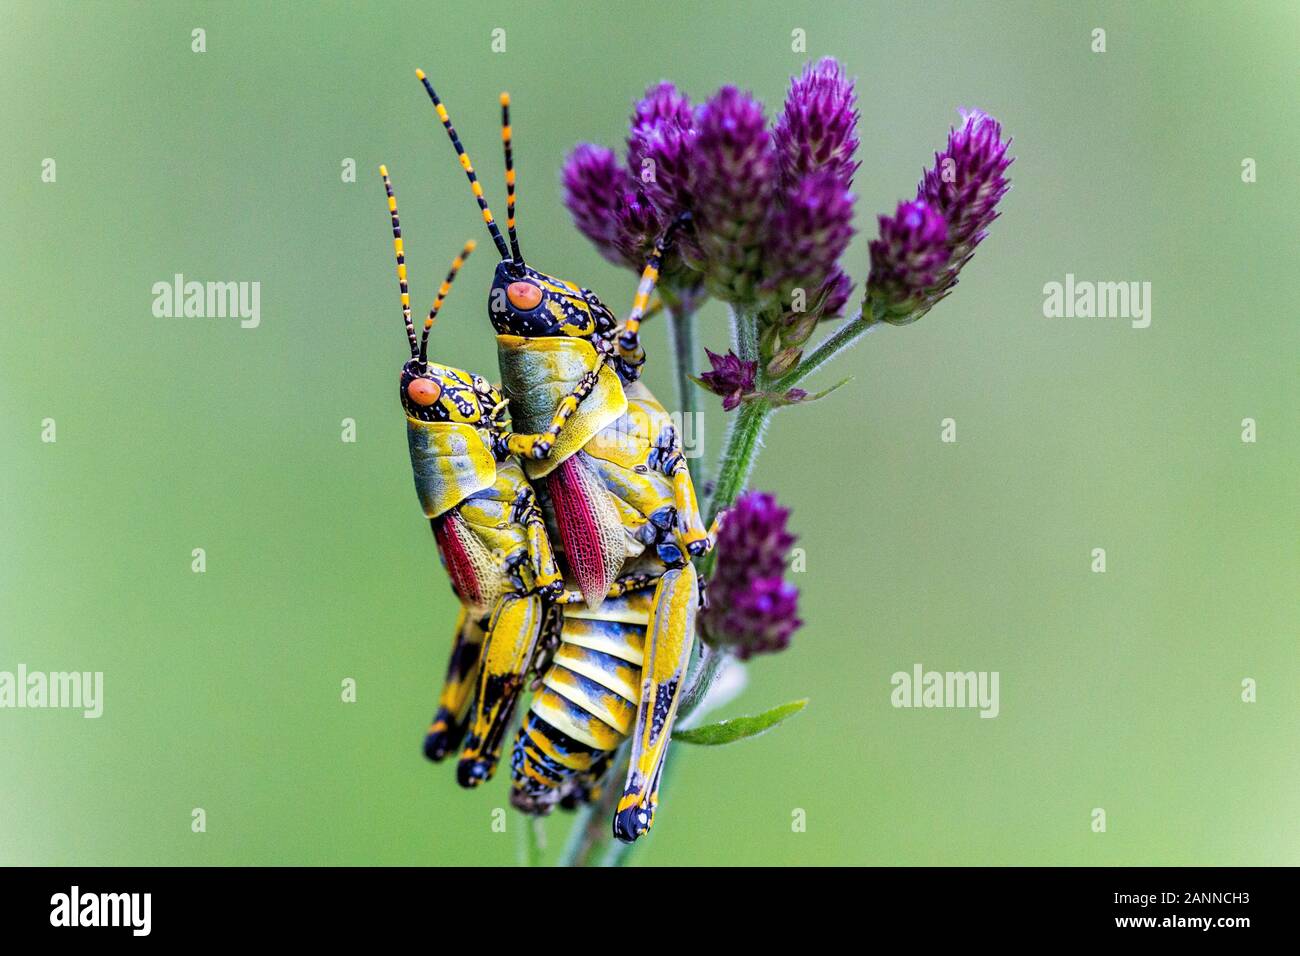 Close up of mating grasshoppers (Zonocerus elegans) on a purple flower, green background, Drakensberg, South Africa Stock Photo